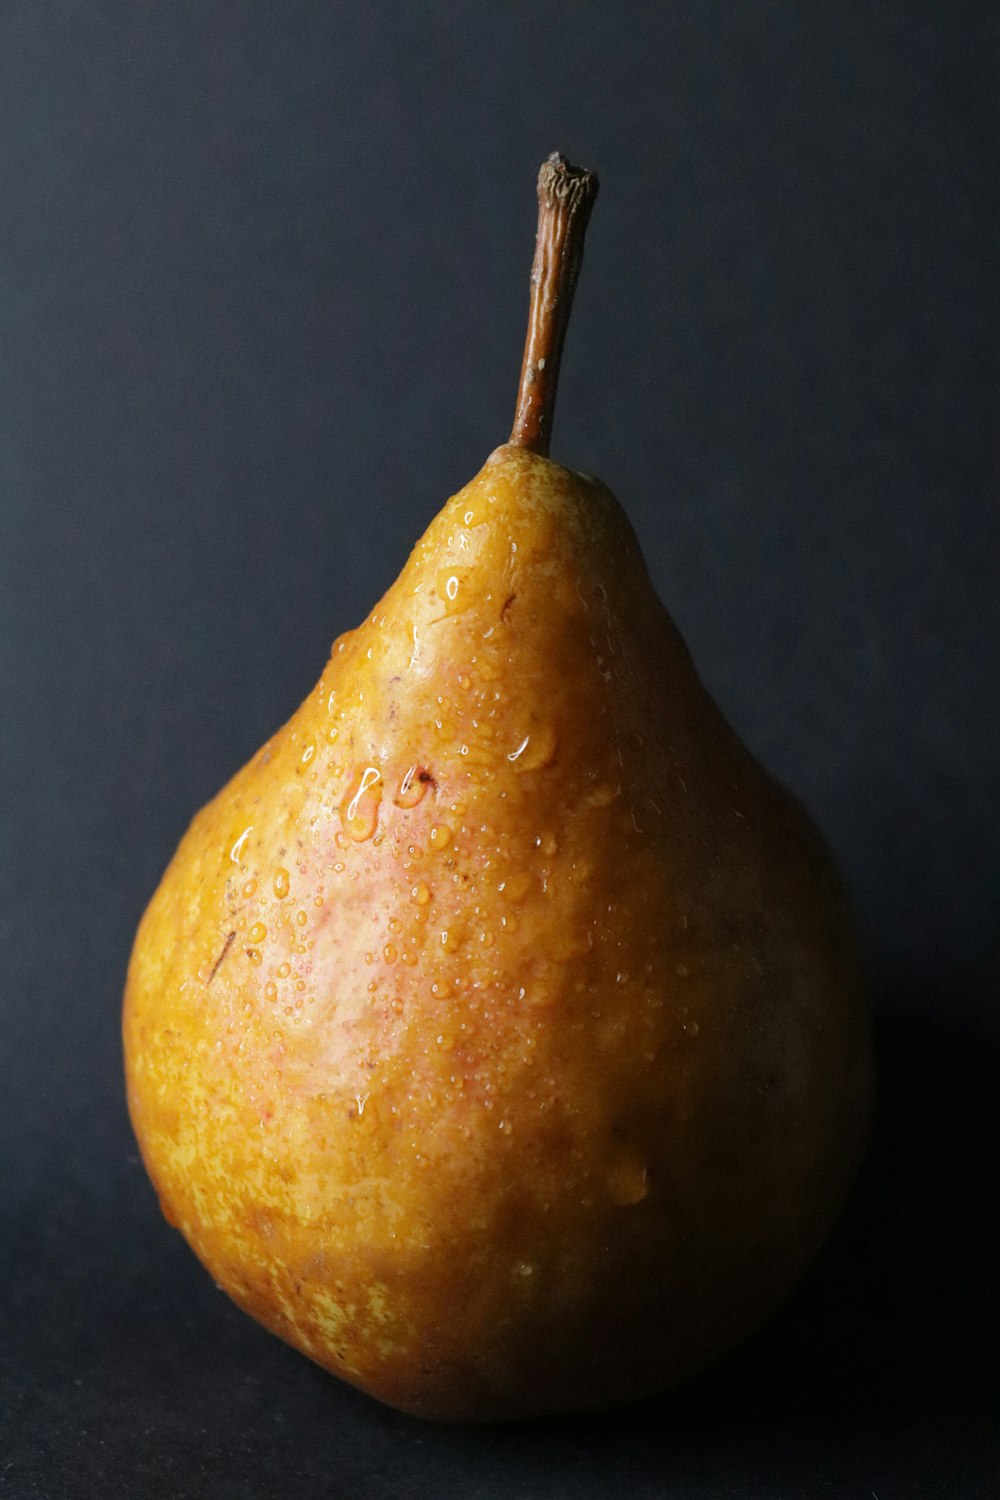 a pear with a brown stem on a black surface